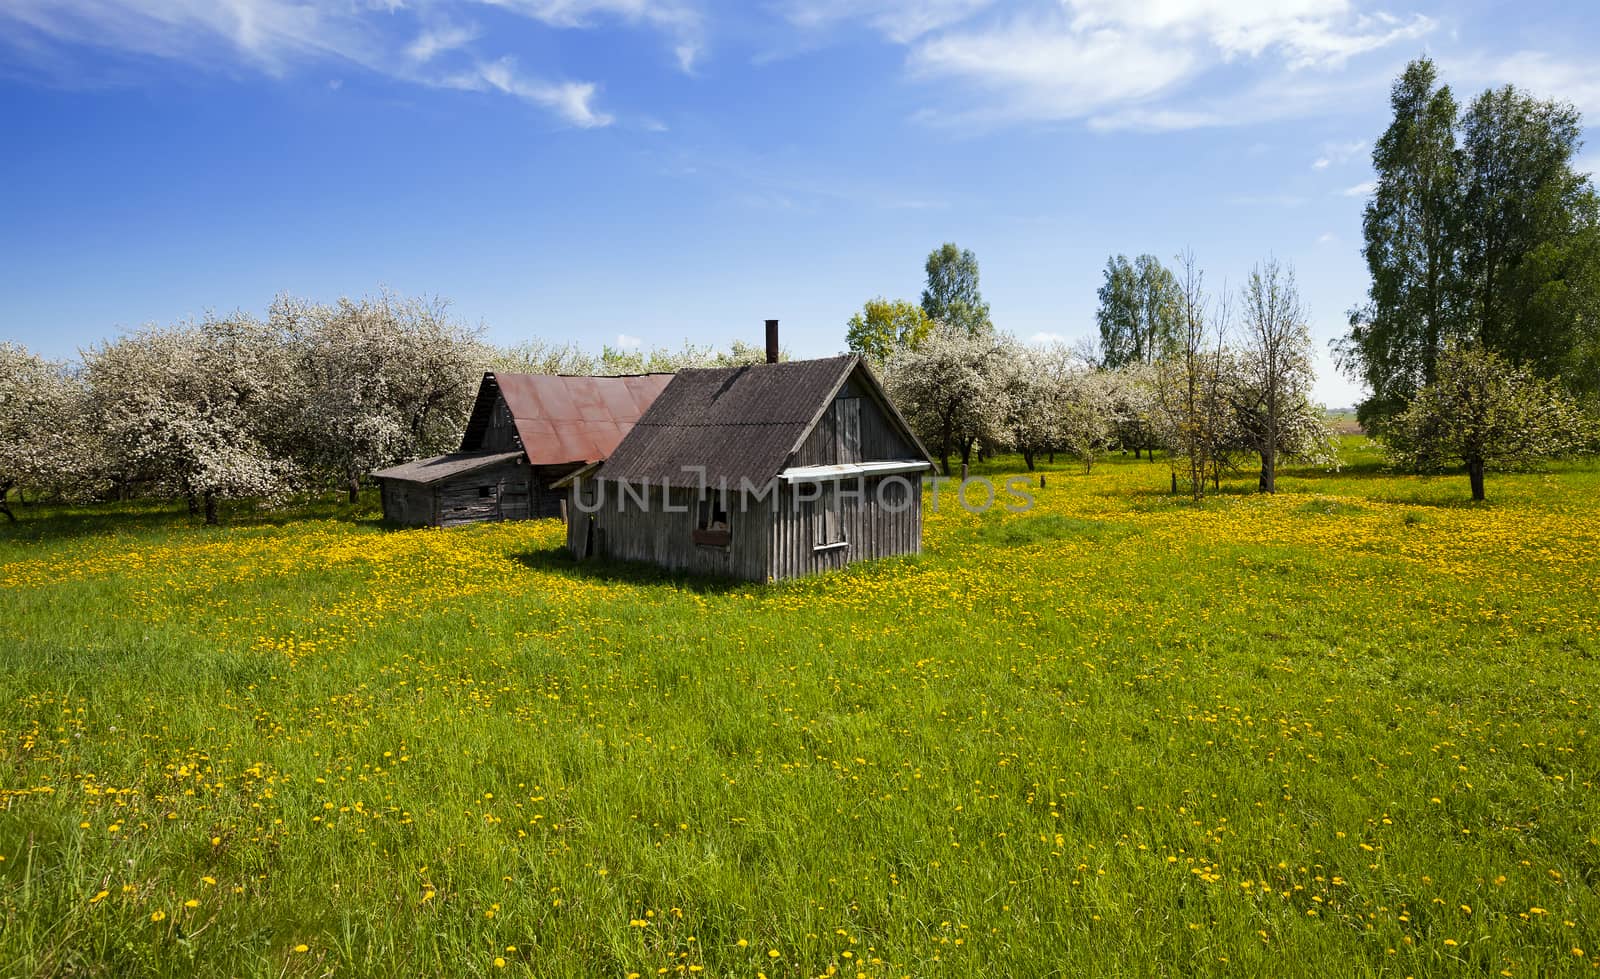   the old house located in rural areas. spring, fruit-trees blossom